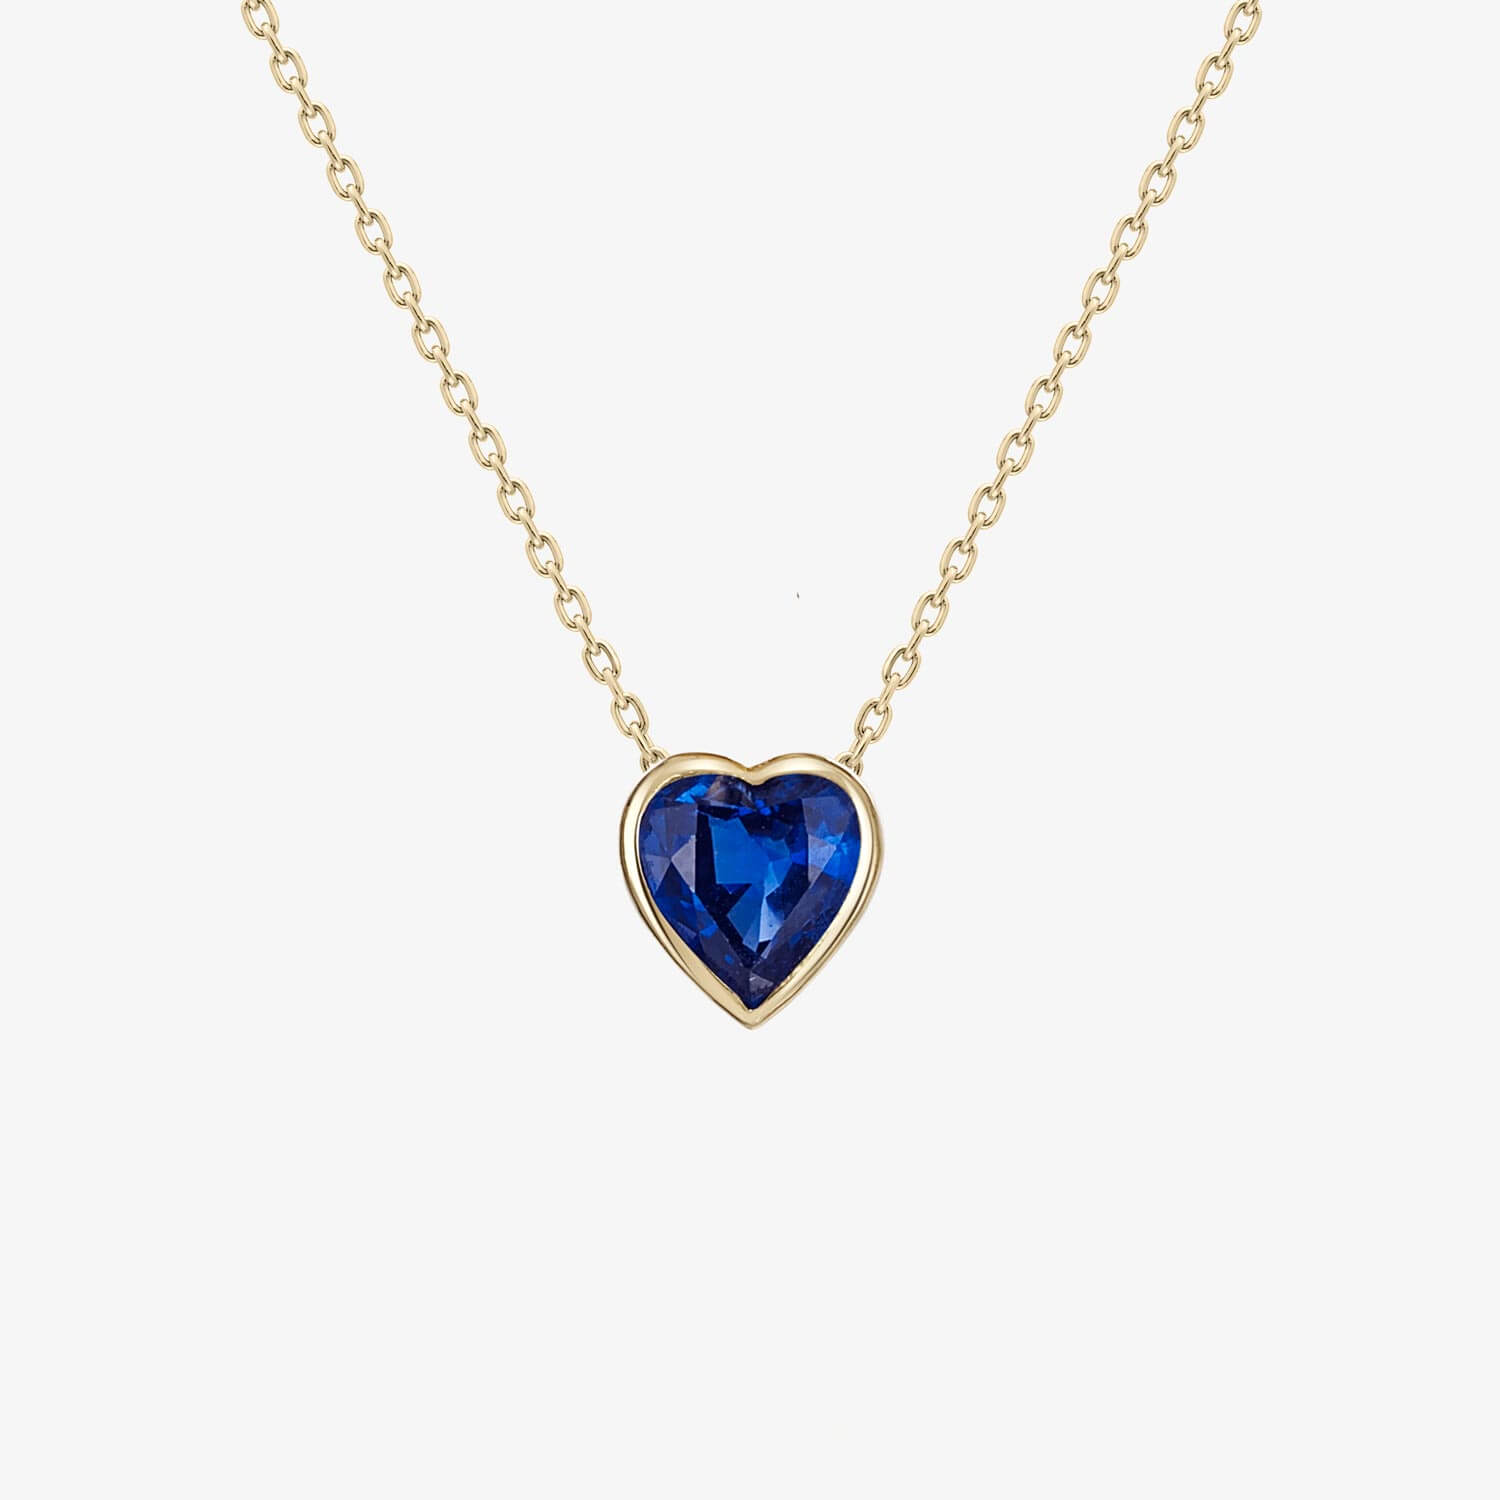 Heart Shaped Sapphire Necklace